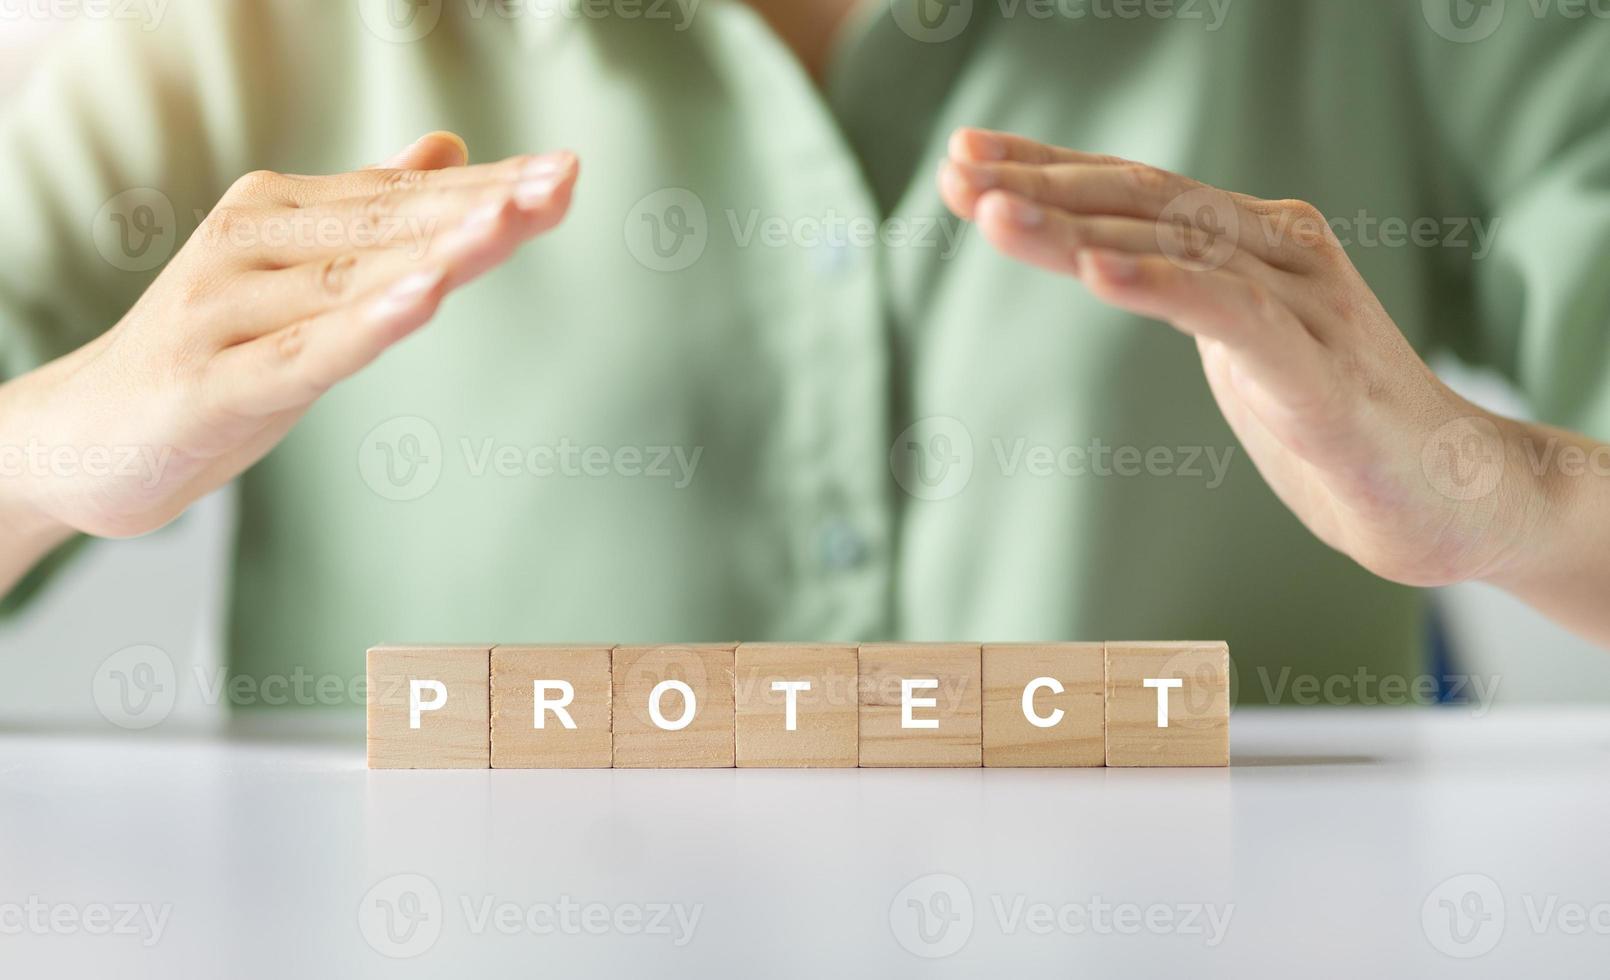 Asian woman hand cover protect word photo